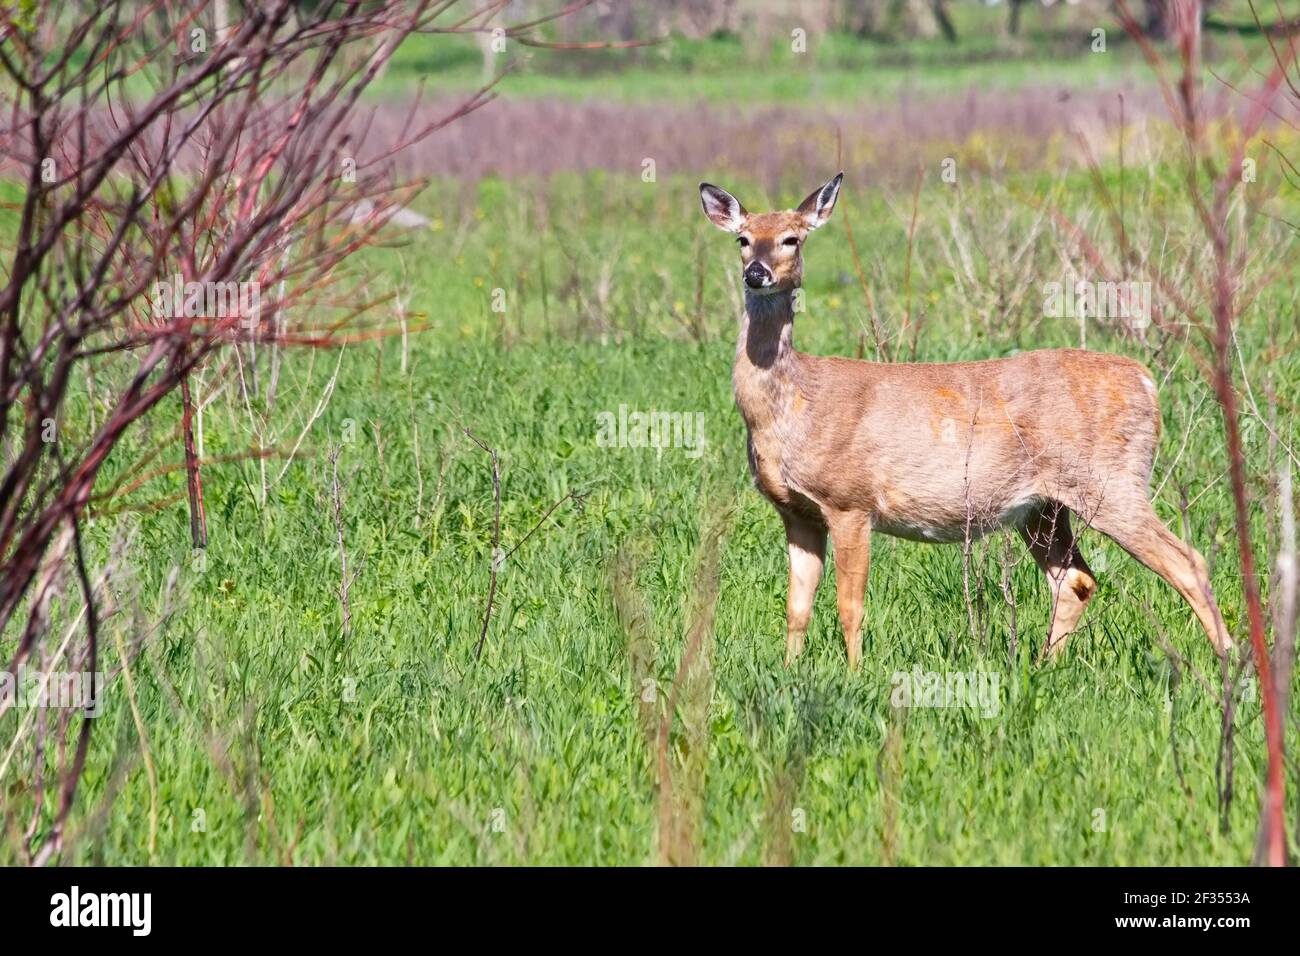 Female deer alert and poised looking through the green grassland she's wandering. Stock Photo